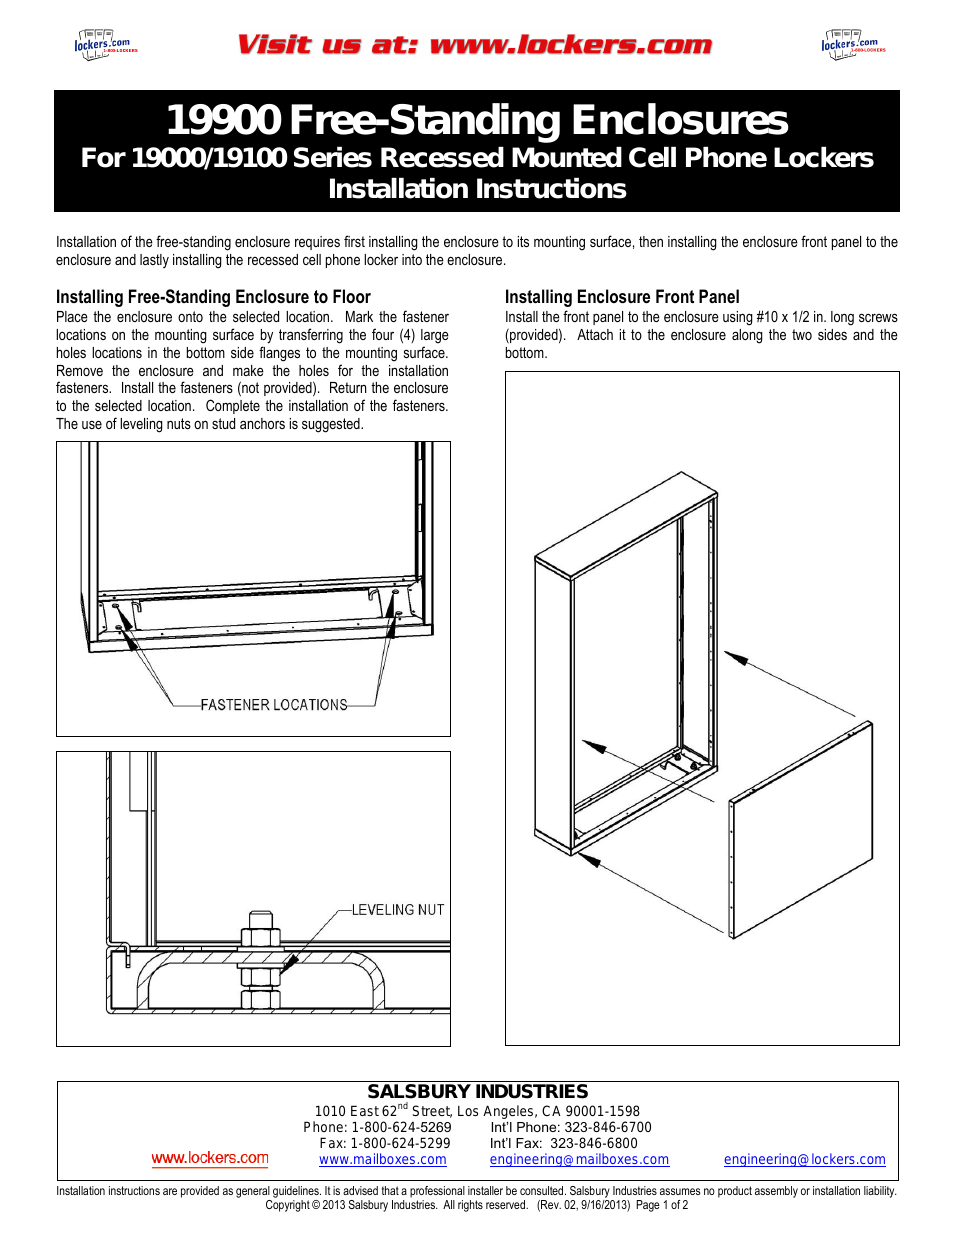 19900 Free-Standing Enclosures For 19000/19100 Series Recessed Mounted Cell Phone Lockers